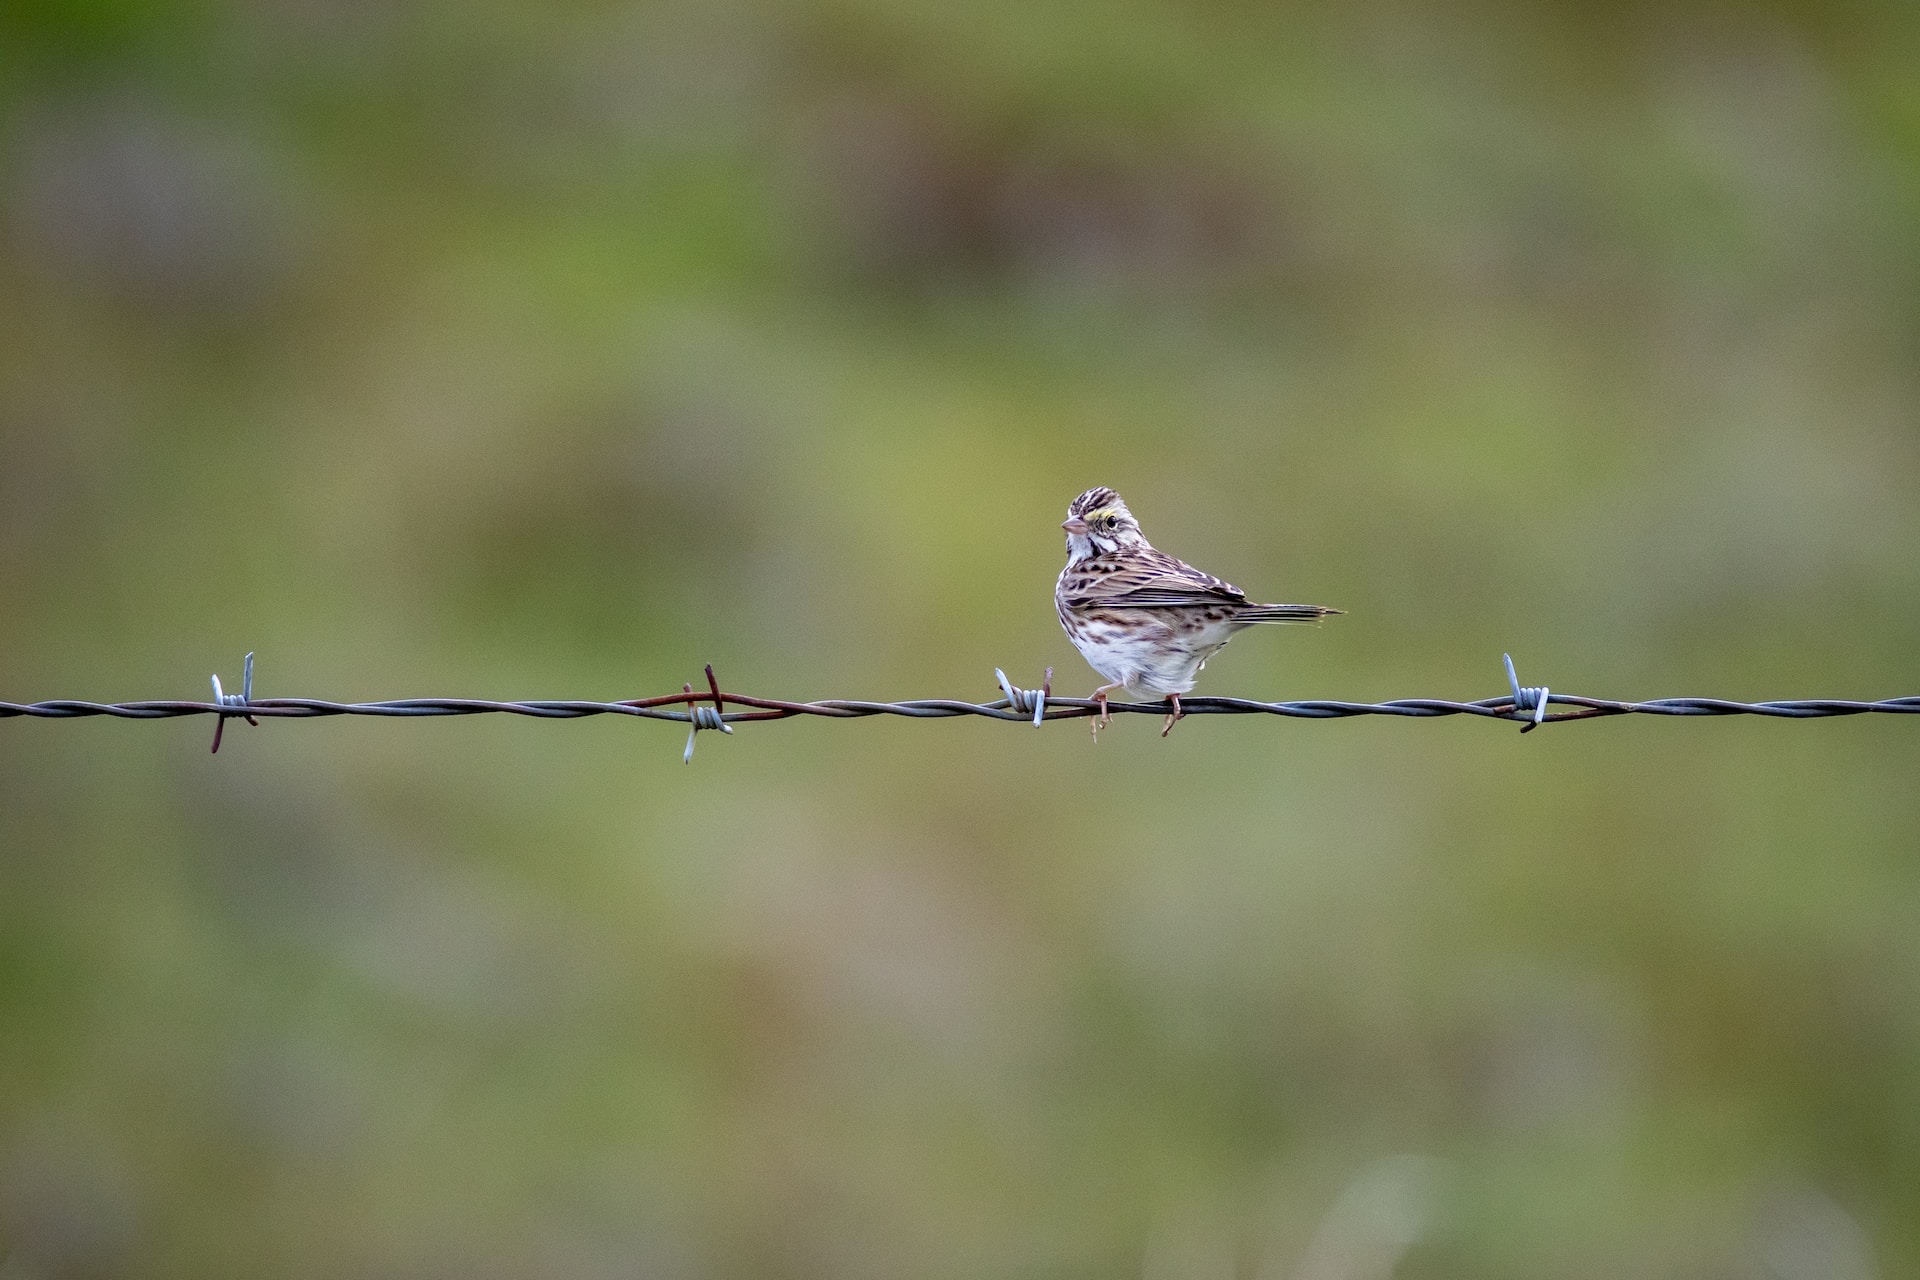 A small bird sitting on a wire fence